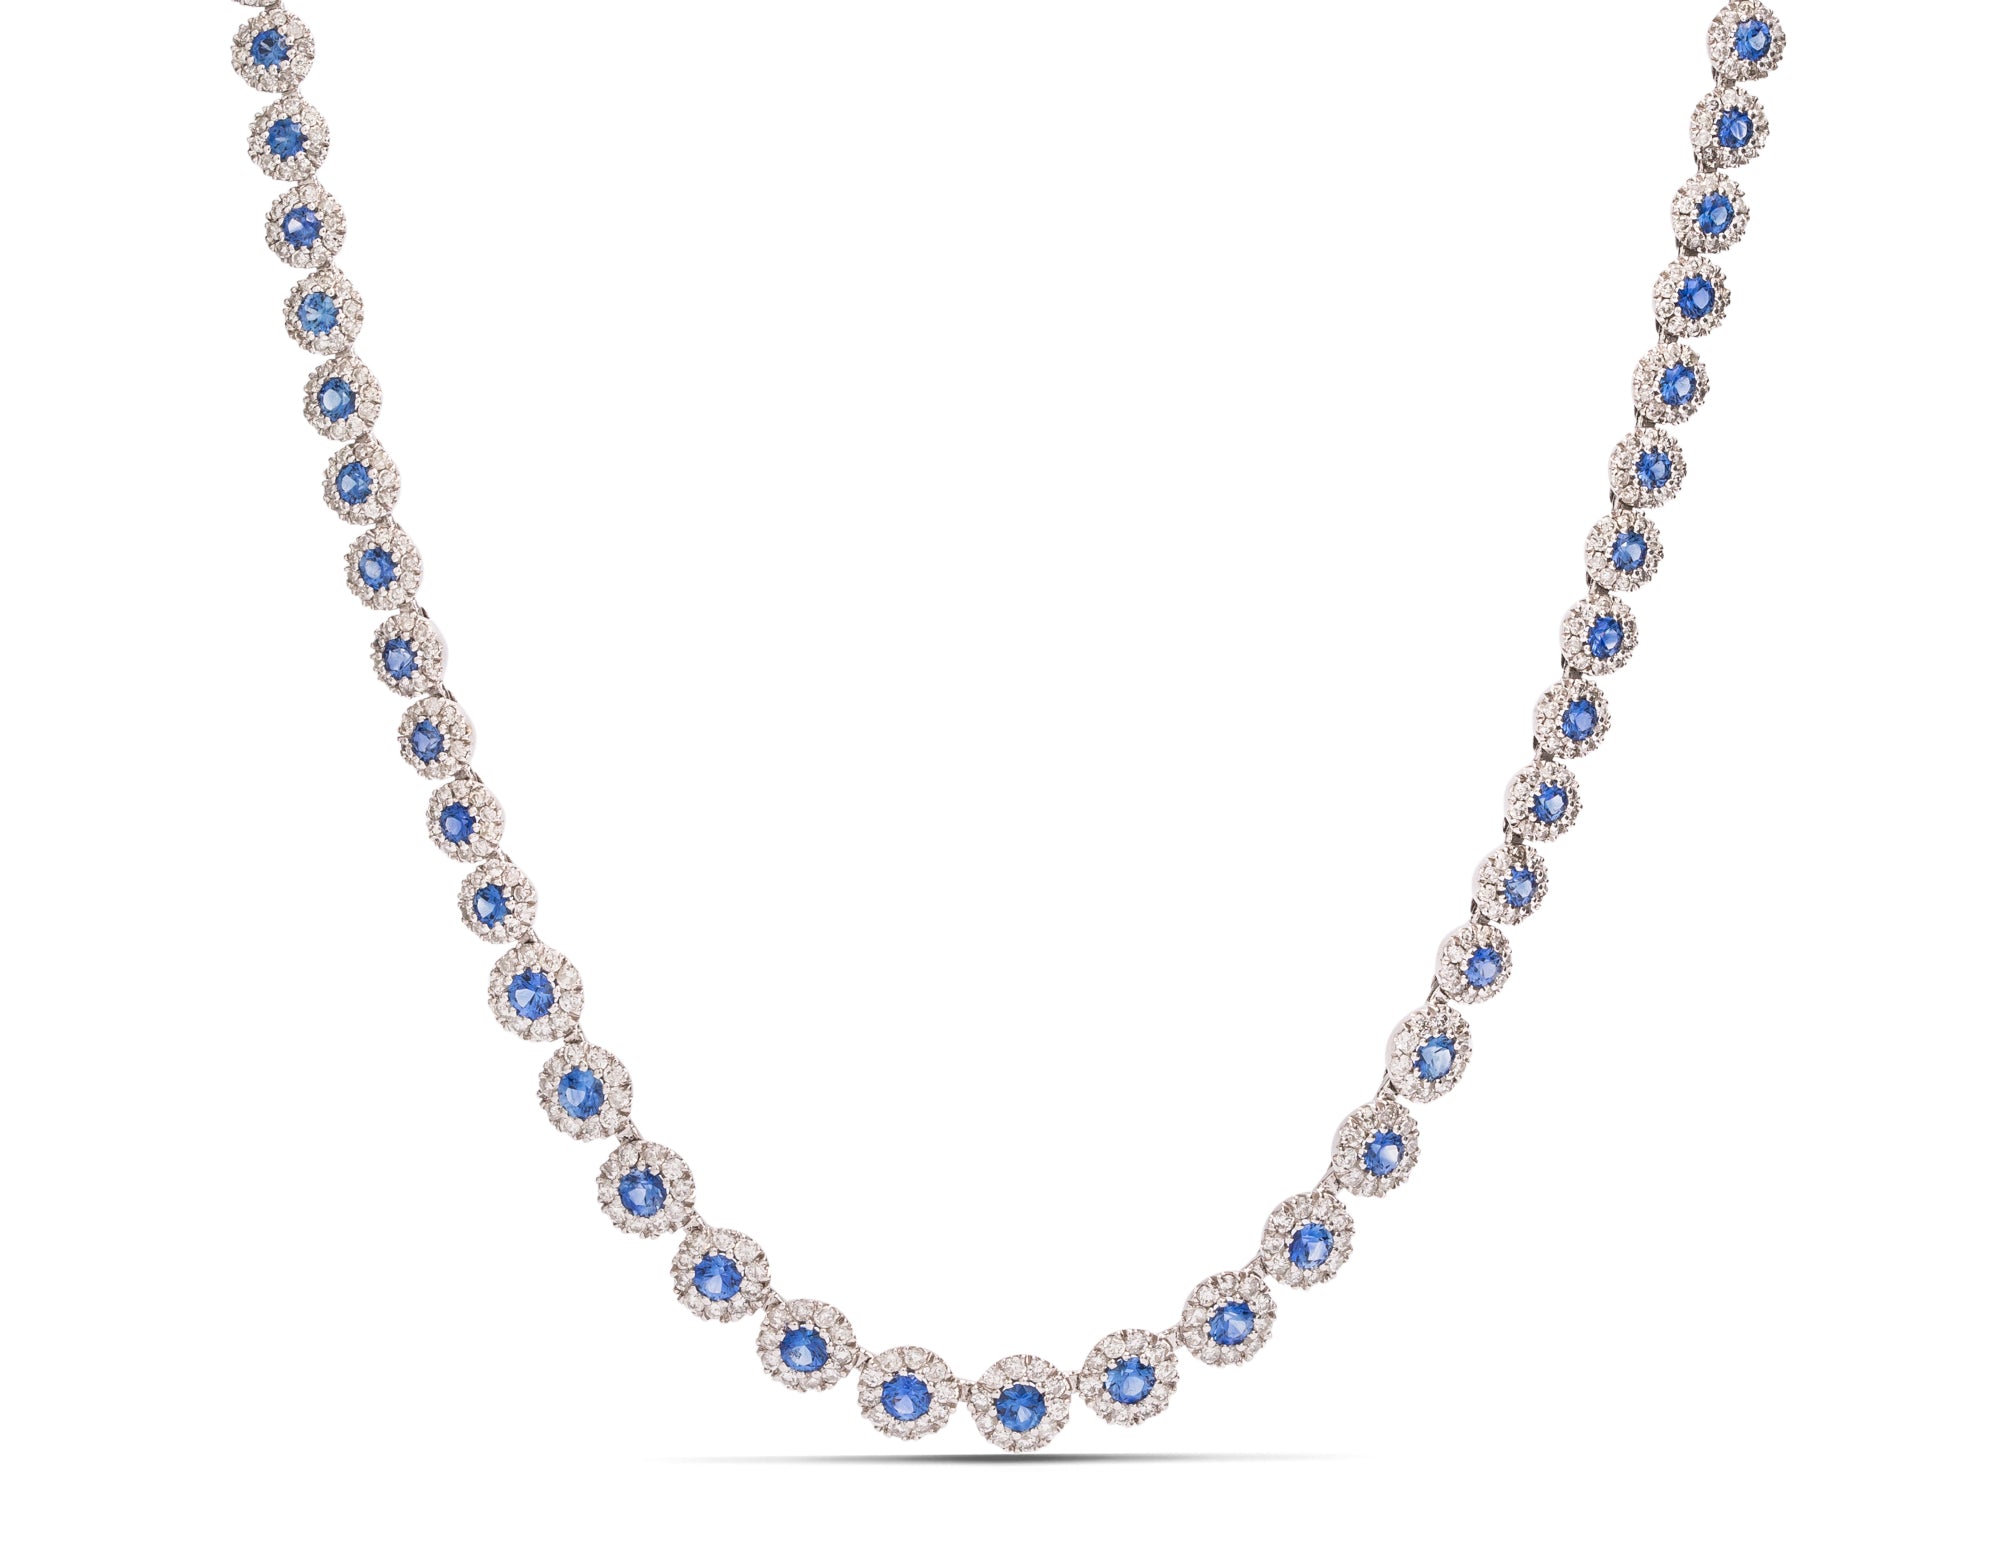 Sapphire Cushion Necklace - Charles Koll Jewellers